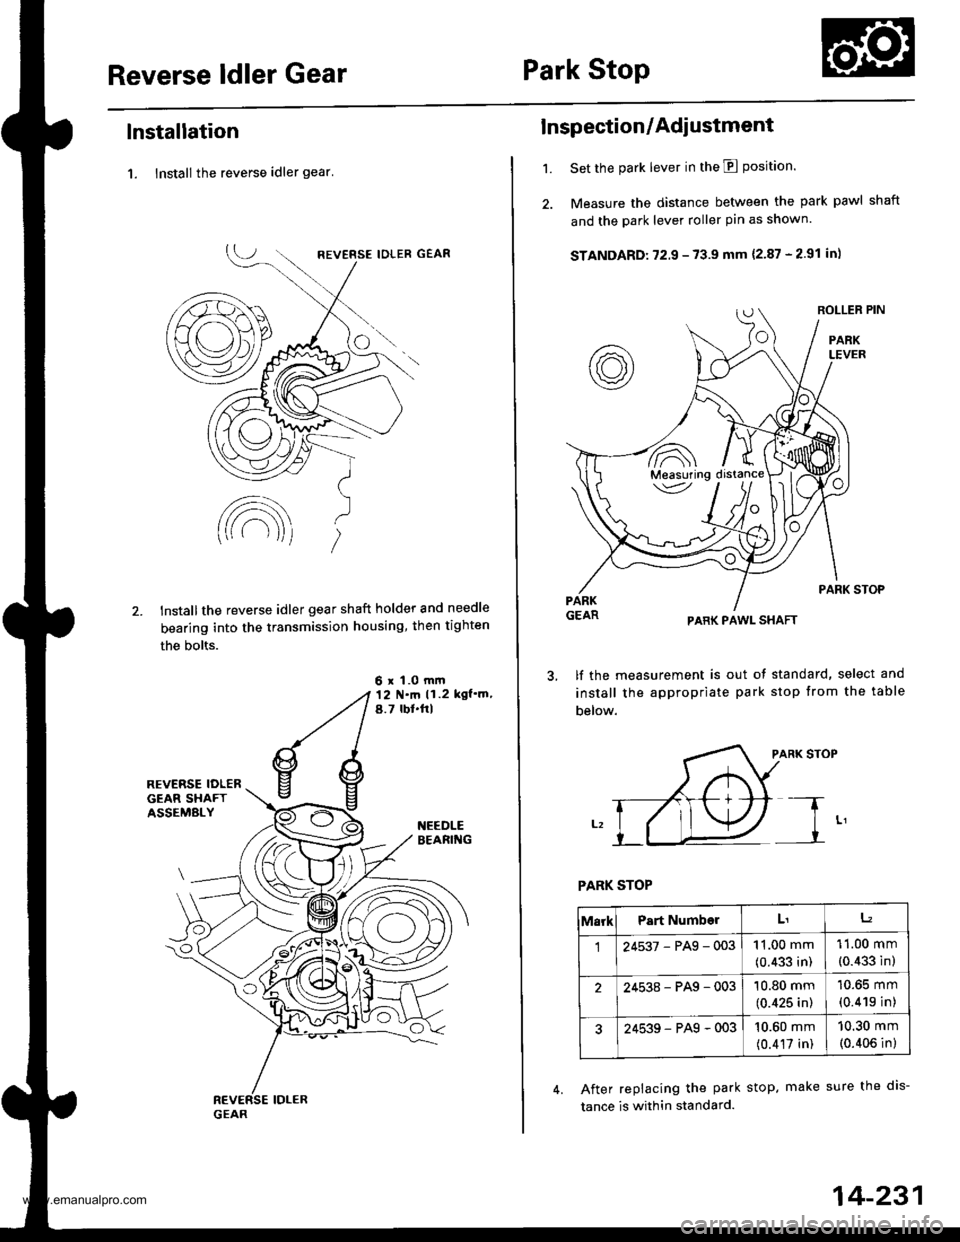 HONDA CR-V 1999 RD1-RD3 / 1.G Owners Guide 
Reverse ldler GearPark Stop
lnstallation
1. lnstall the reverse idler gear
lnstallthe reverse idler gear shaft holder and needle
bearing into the transmission housing, then tighten
the bolts.
6 x 1.